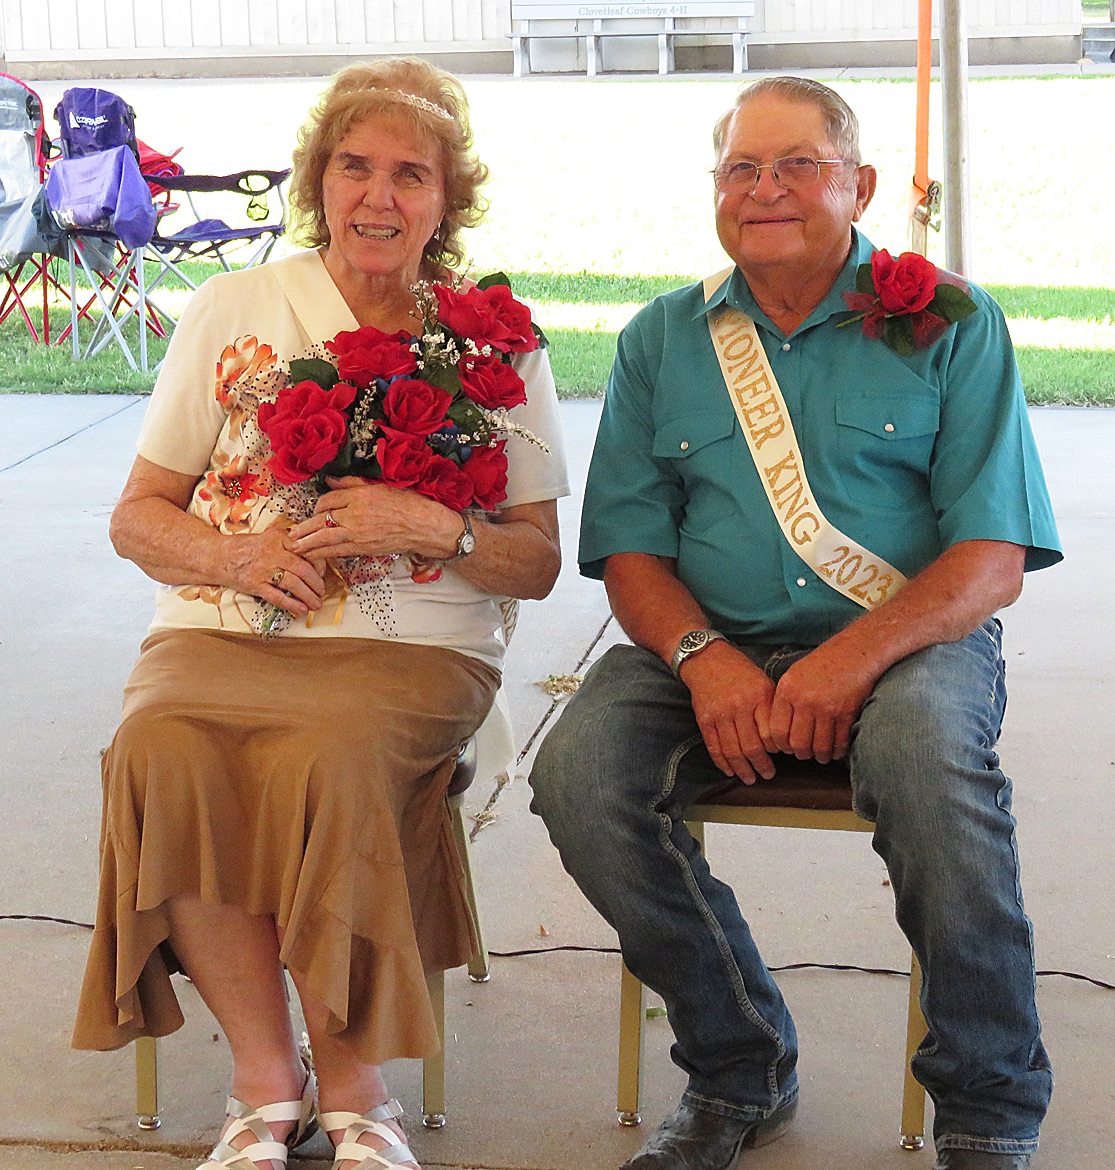 The Stevens County 2023 Pioneer Queen Ruthie Winget and King Mike Willis.